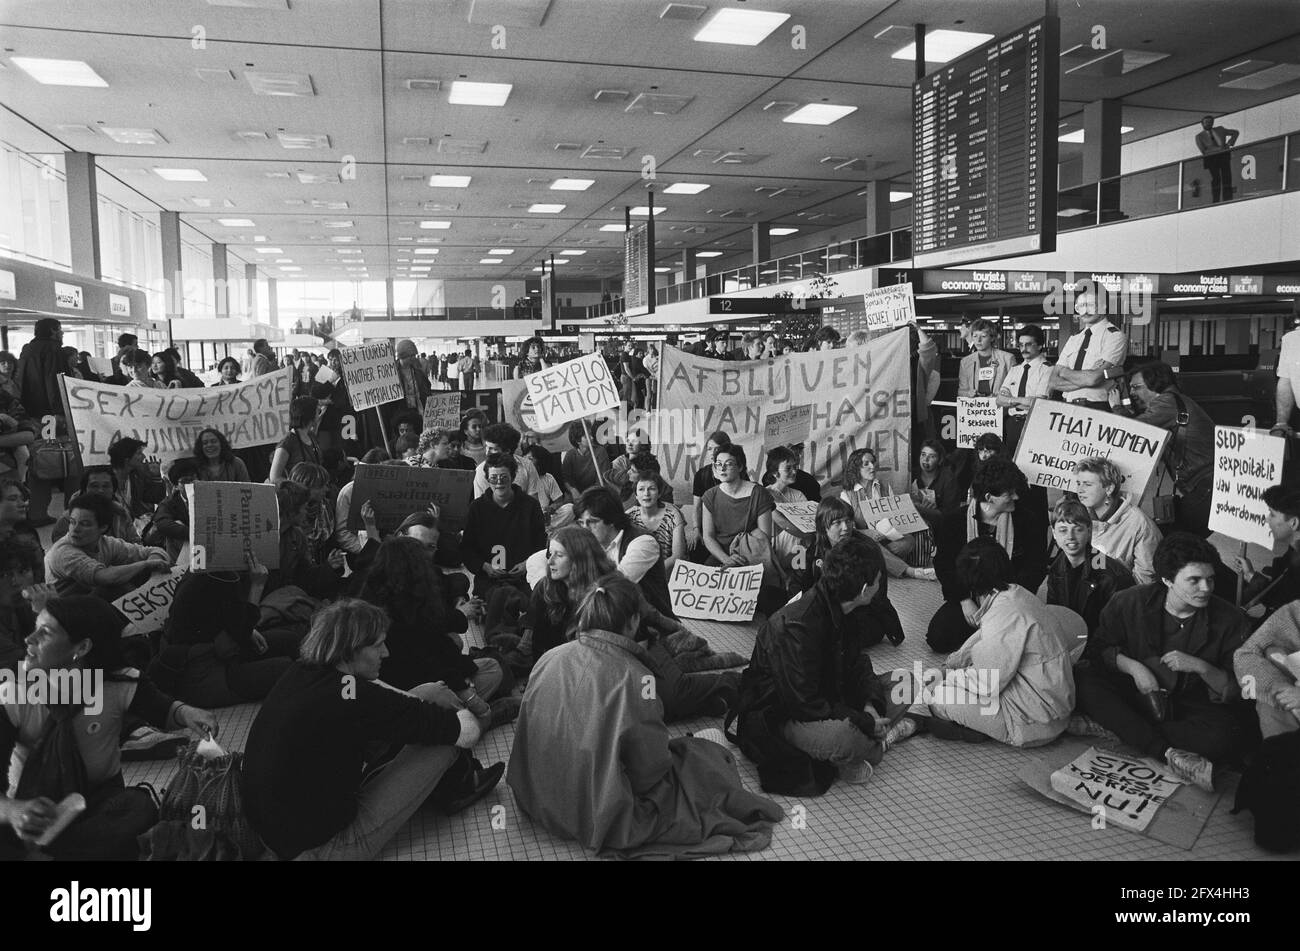 Demonstration at Schiphol against so-called sex trips to Bangkok organized by travel agency in Hoorn, April 5, 1982, Demonstration, The Netherlands, 20th century press agency photo, news to remember, documentary, historic photography 1945-1990, visual stories, human history of the Twentieth Century, capturing moments in time Stock Photo